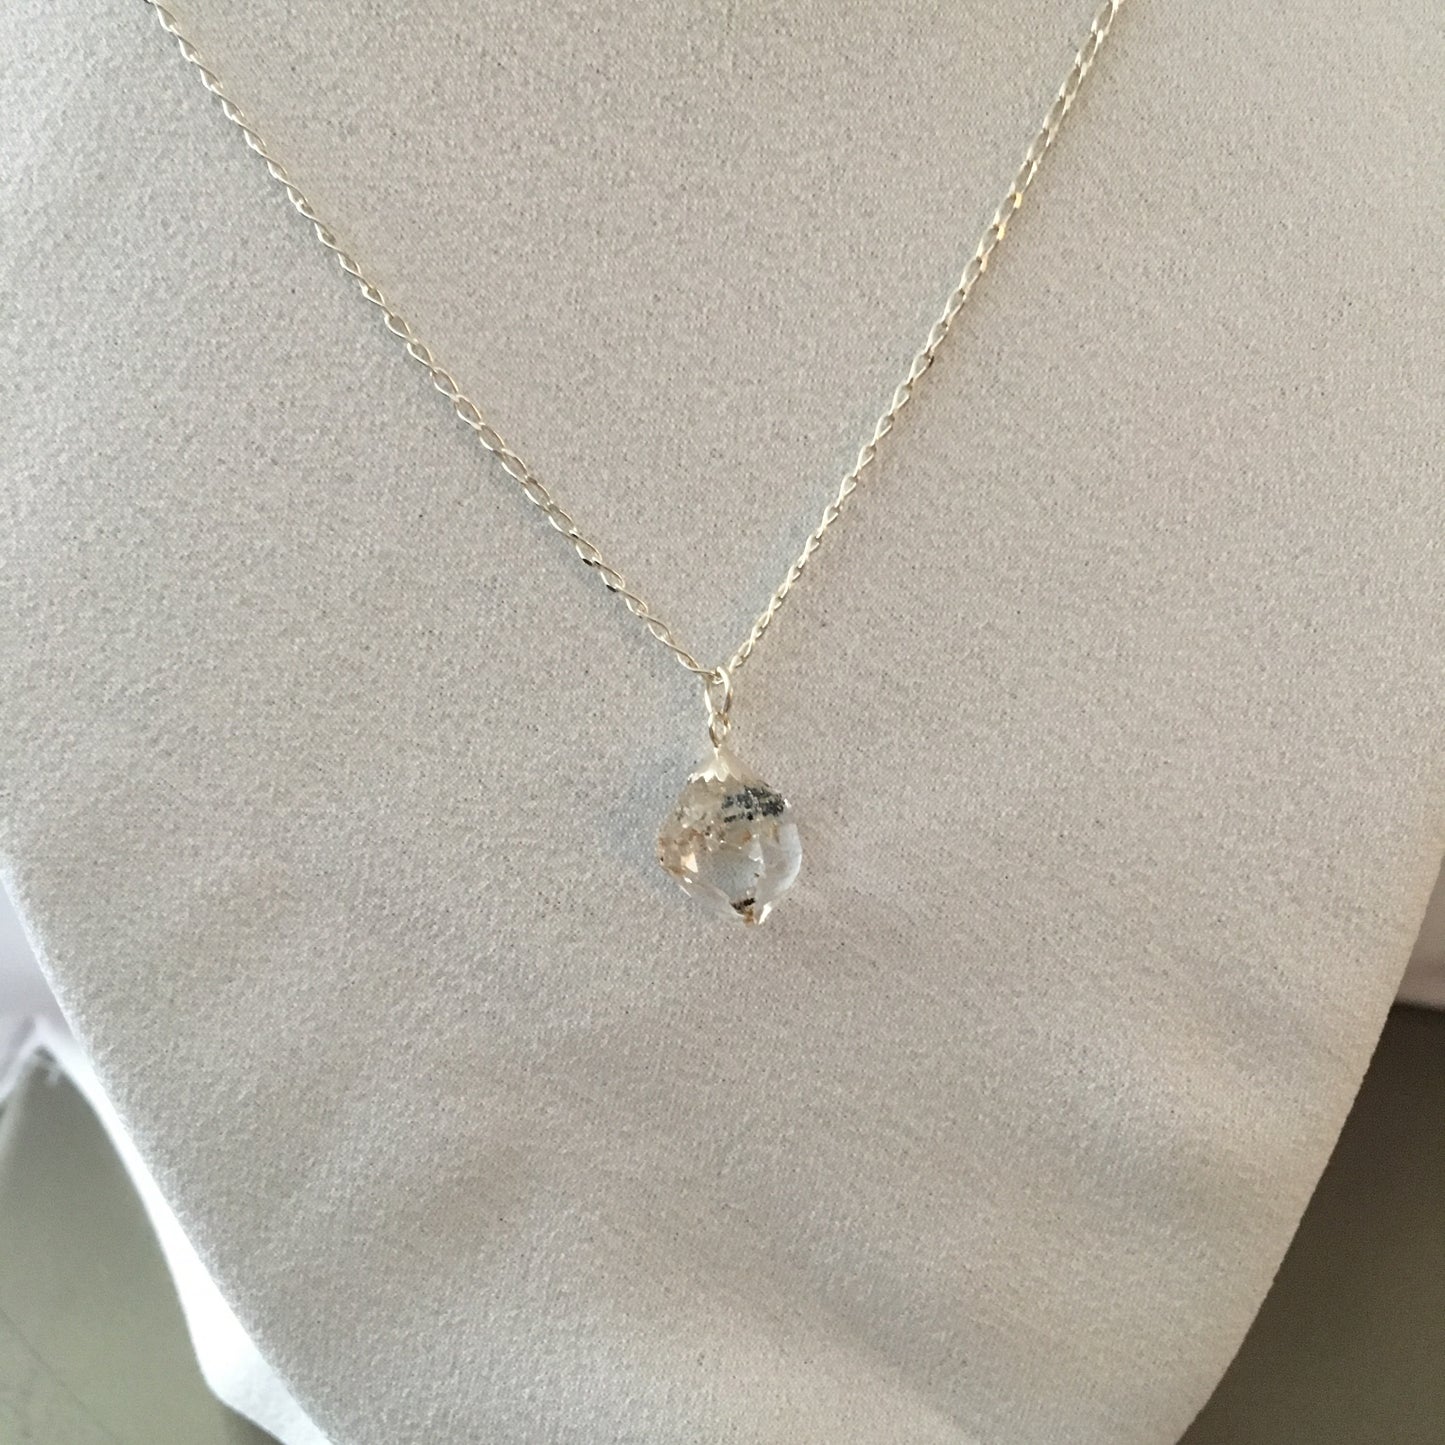 5.55 ct, Grade B Herkimer Diamond Necklace  Unique Golden Healer Crystal or Iron Oxide Crystal  Sterling Silver 18" Curb Chain  Mined in Herkimer New York